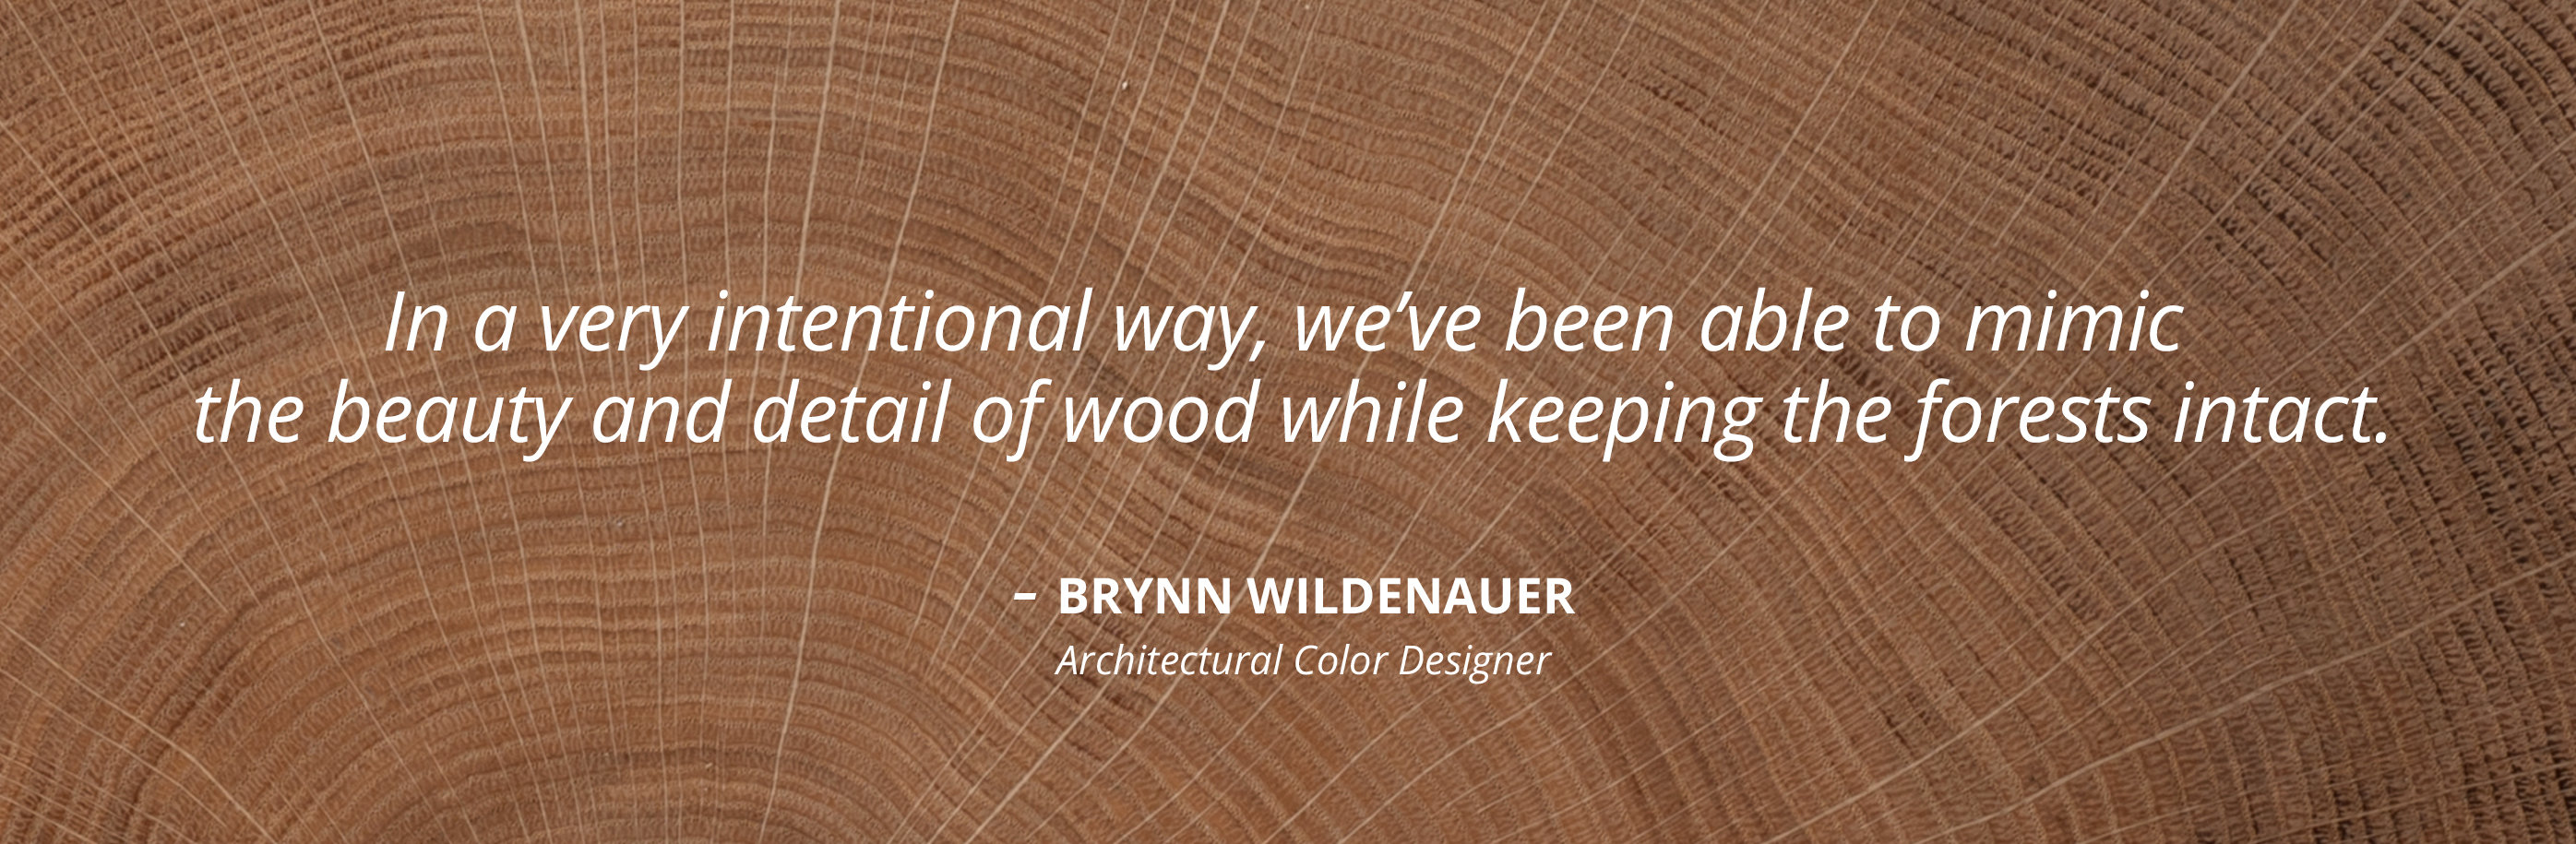 Bring Nature to Life with an Emulate Wood Collection sample!